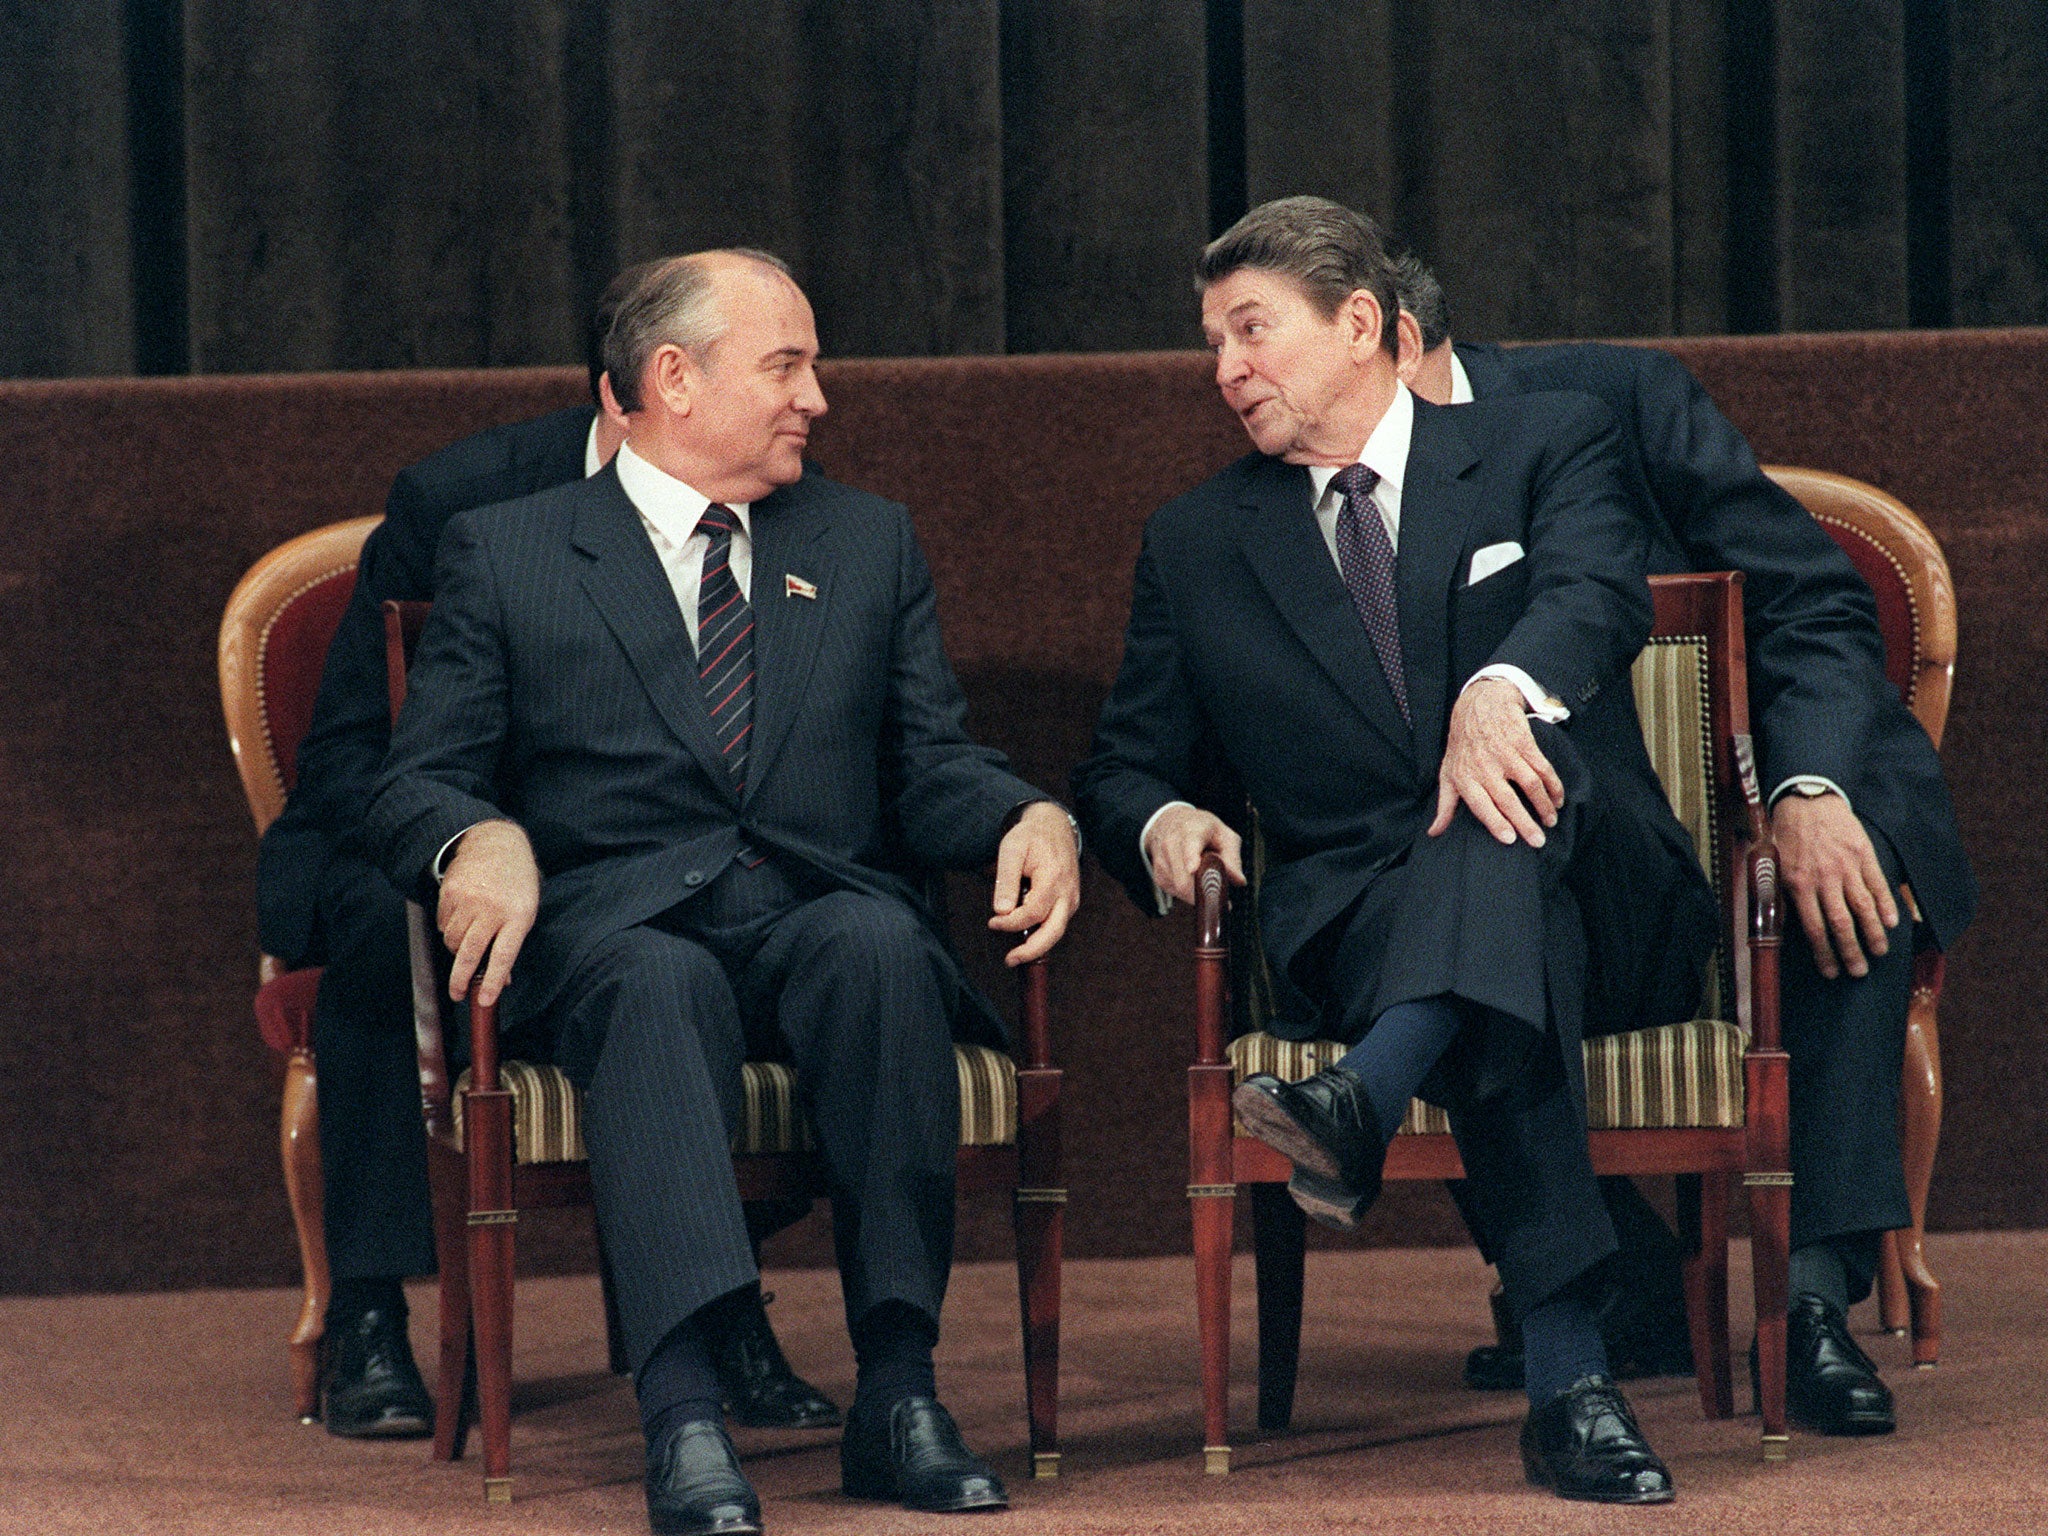 Remarkably, Gorbachev struck up a friendship with US president Ronald Reagan